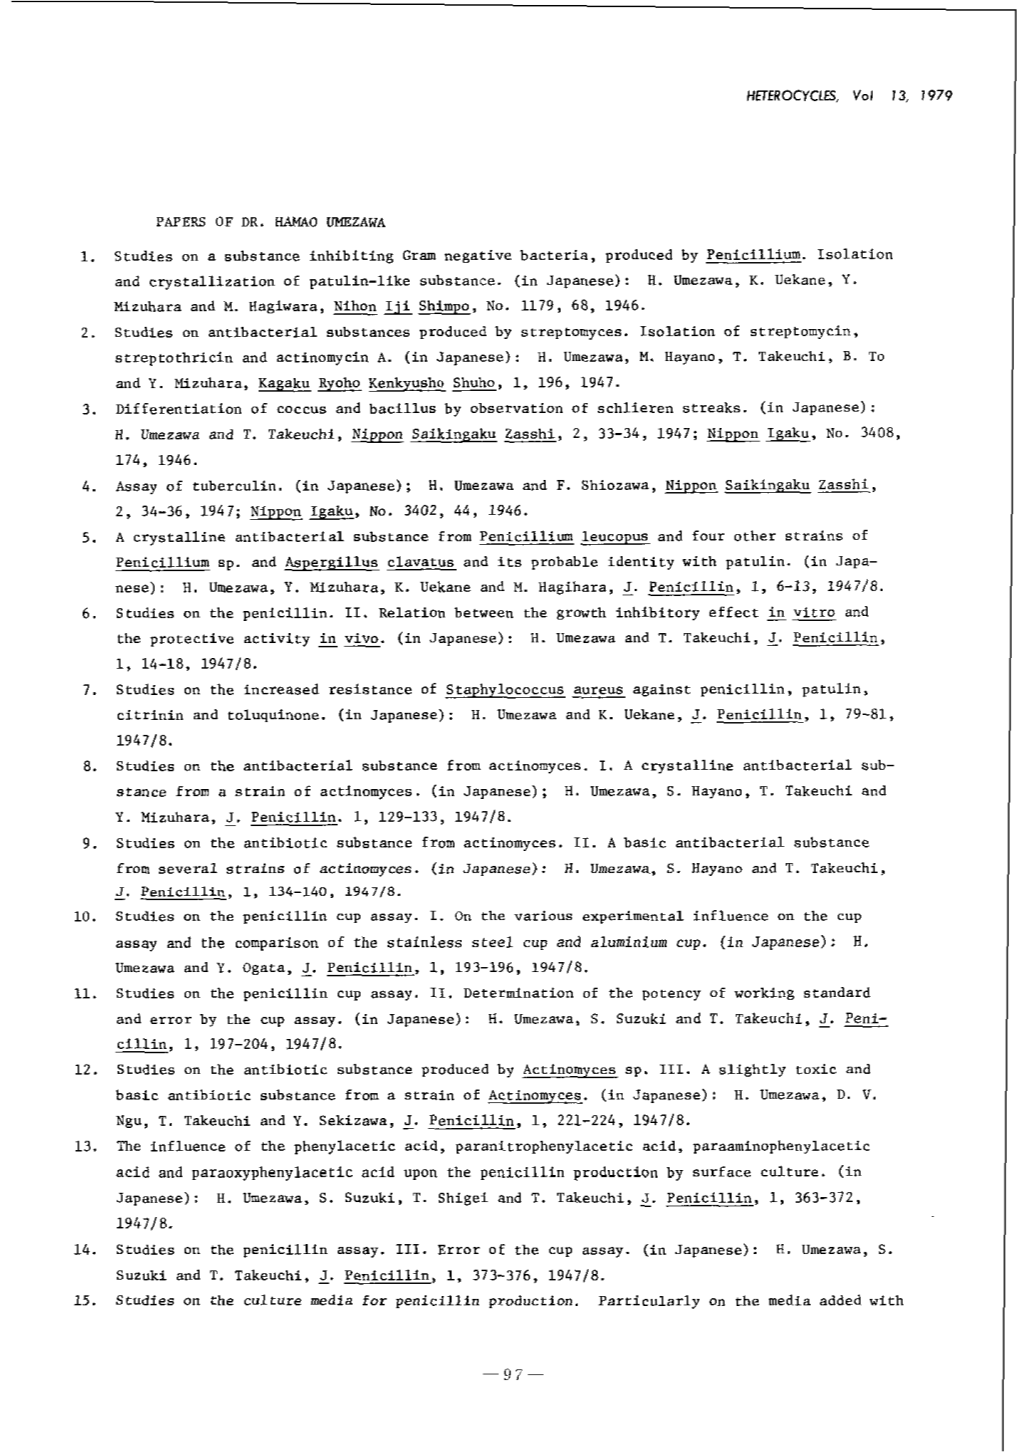 PAPERS of DR. W O Irlezawa 1. Stvdies on a Substance Inhibiting